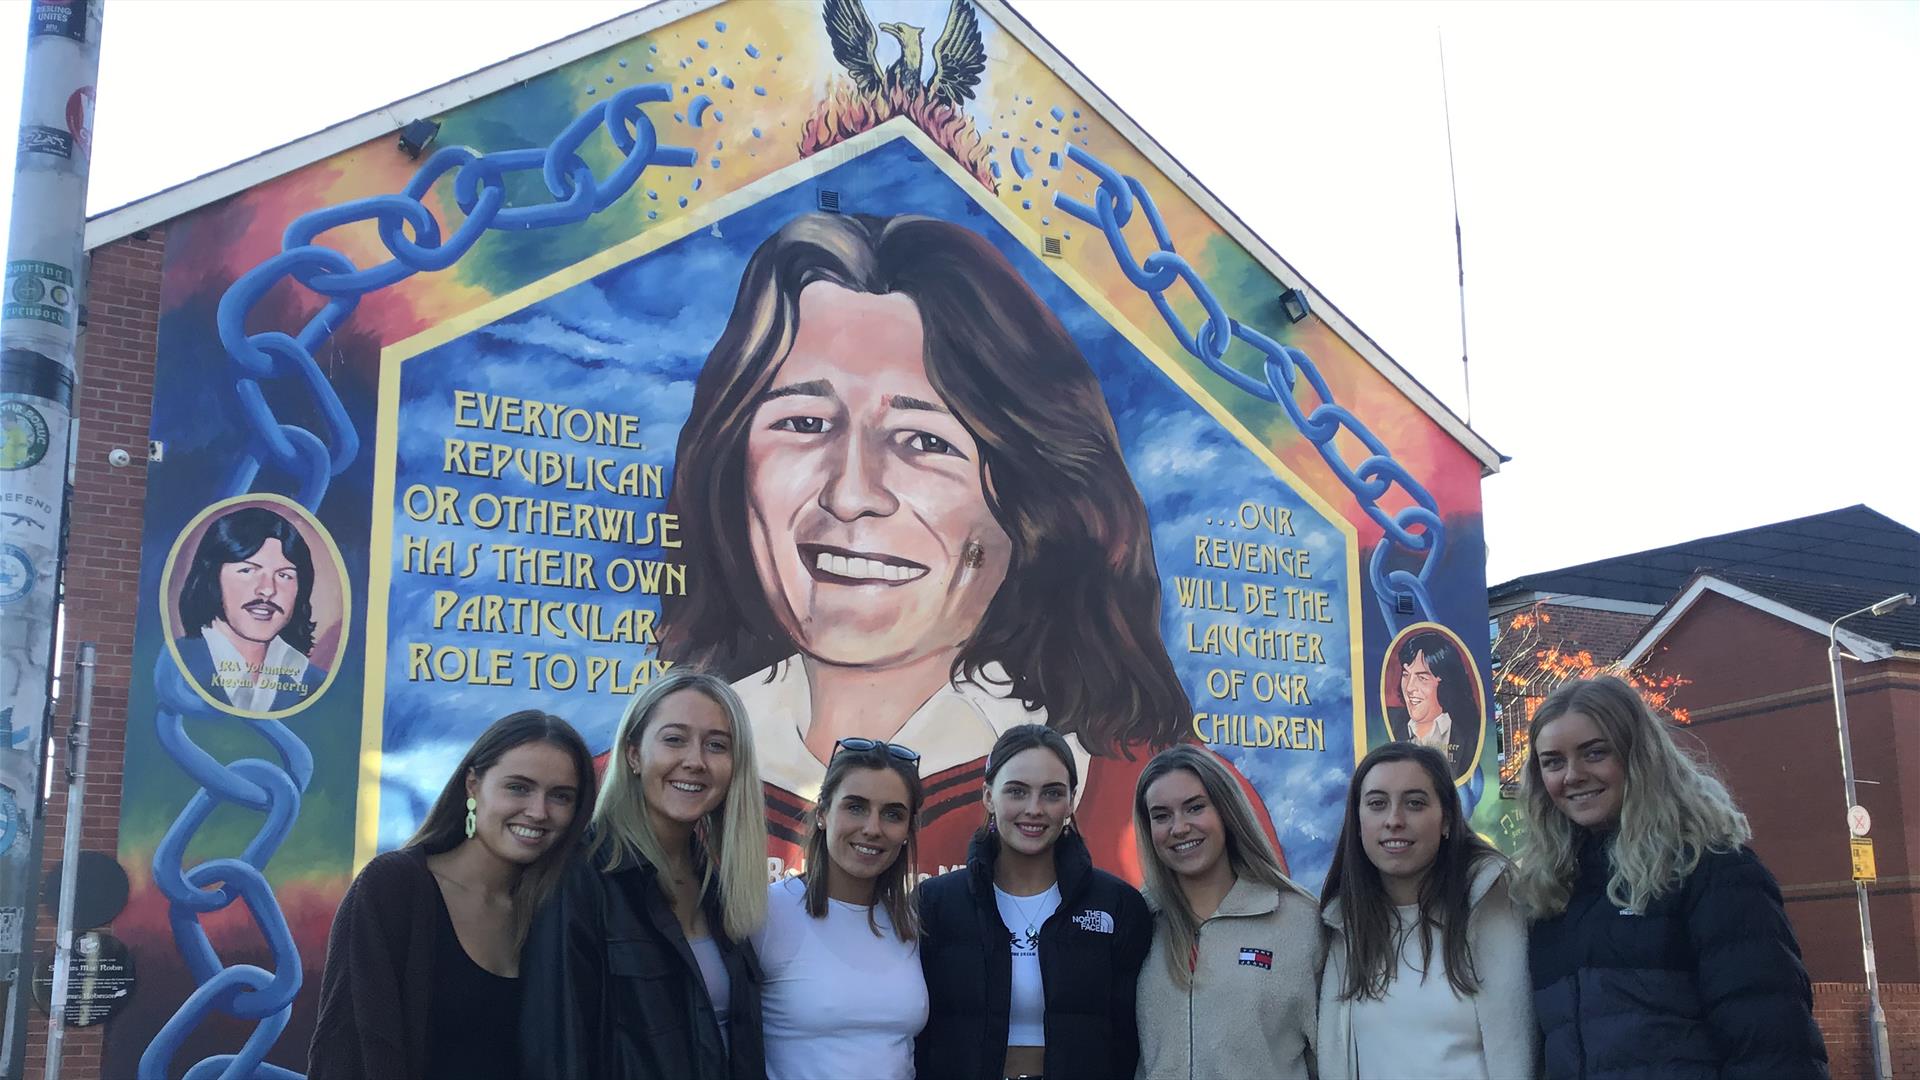 Bobby Sands mural Falls Road Belfast-  Group of visitors standing in front of mural.